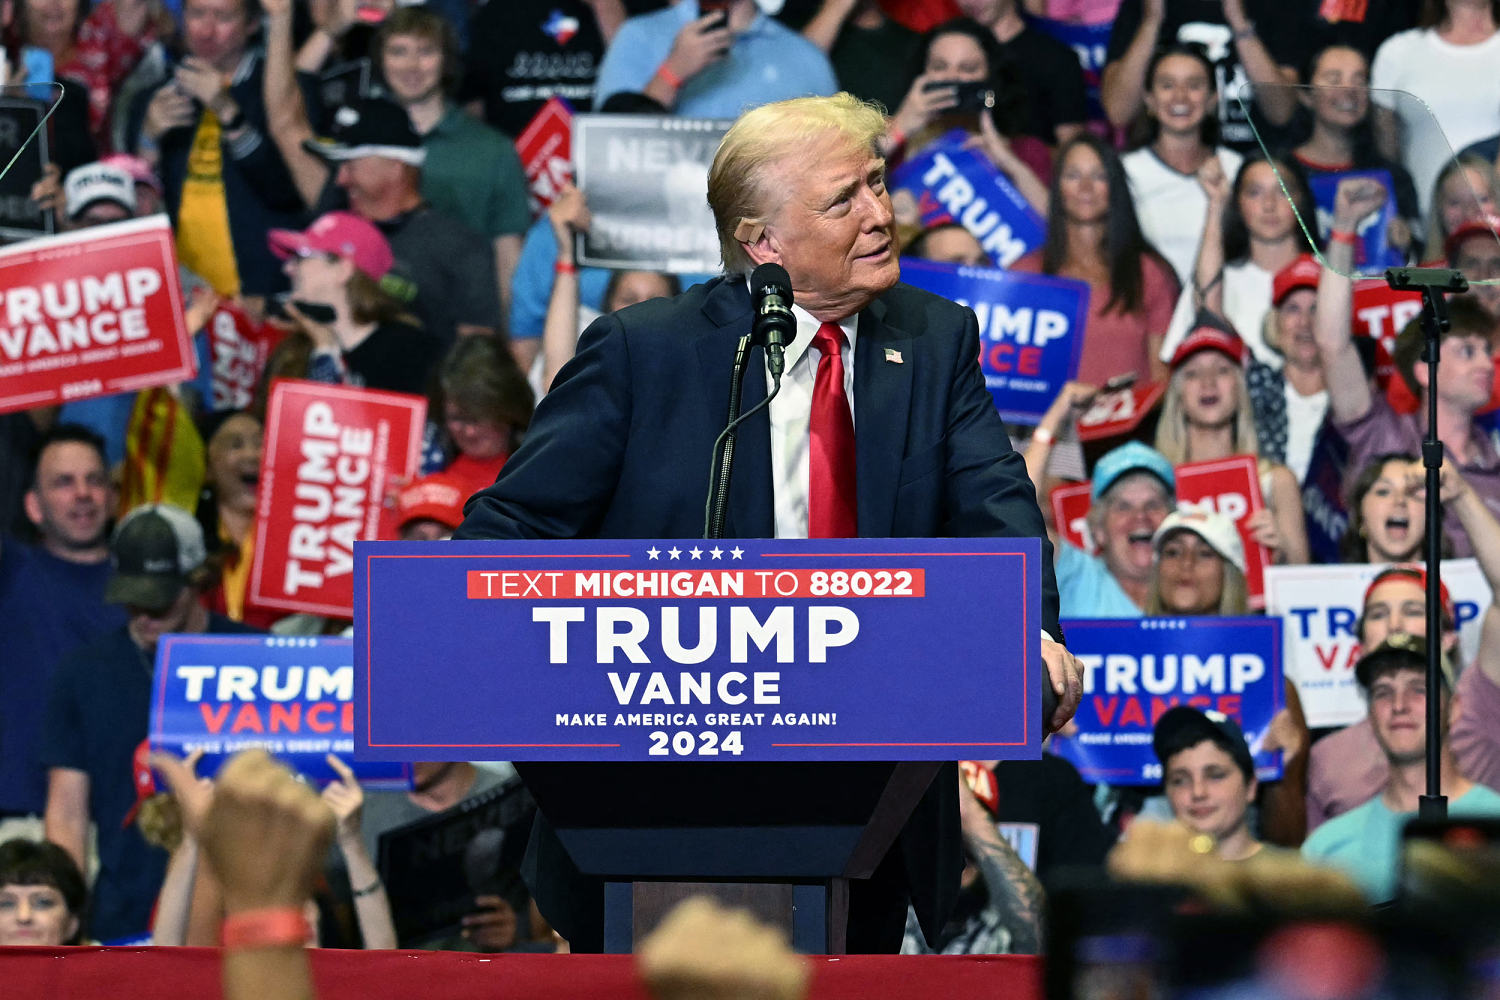 Trump returns to criticizing Biden at first rally since attempted assassination